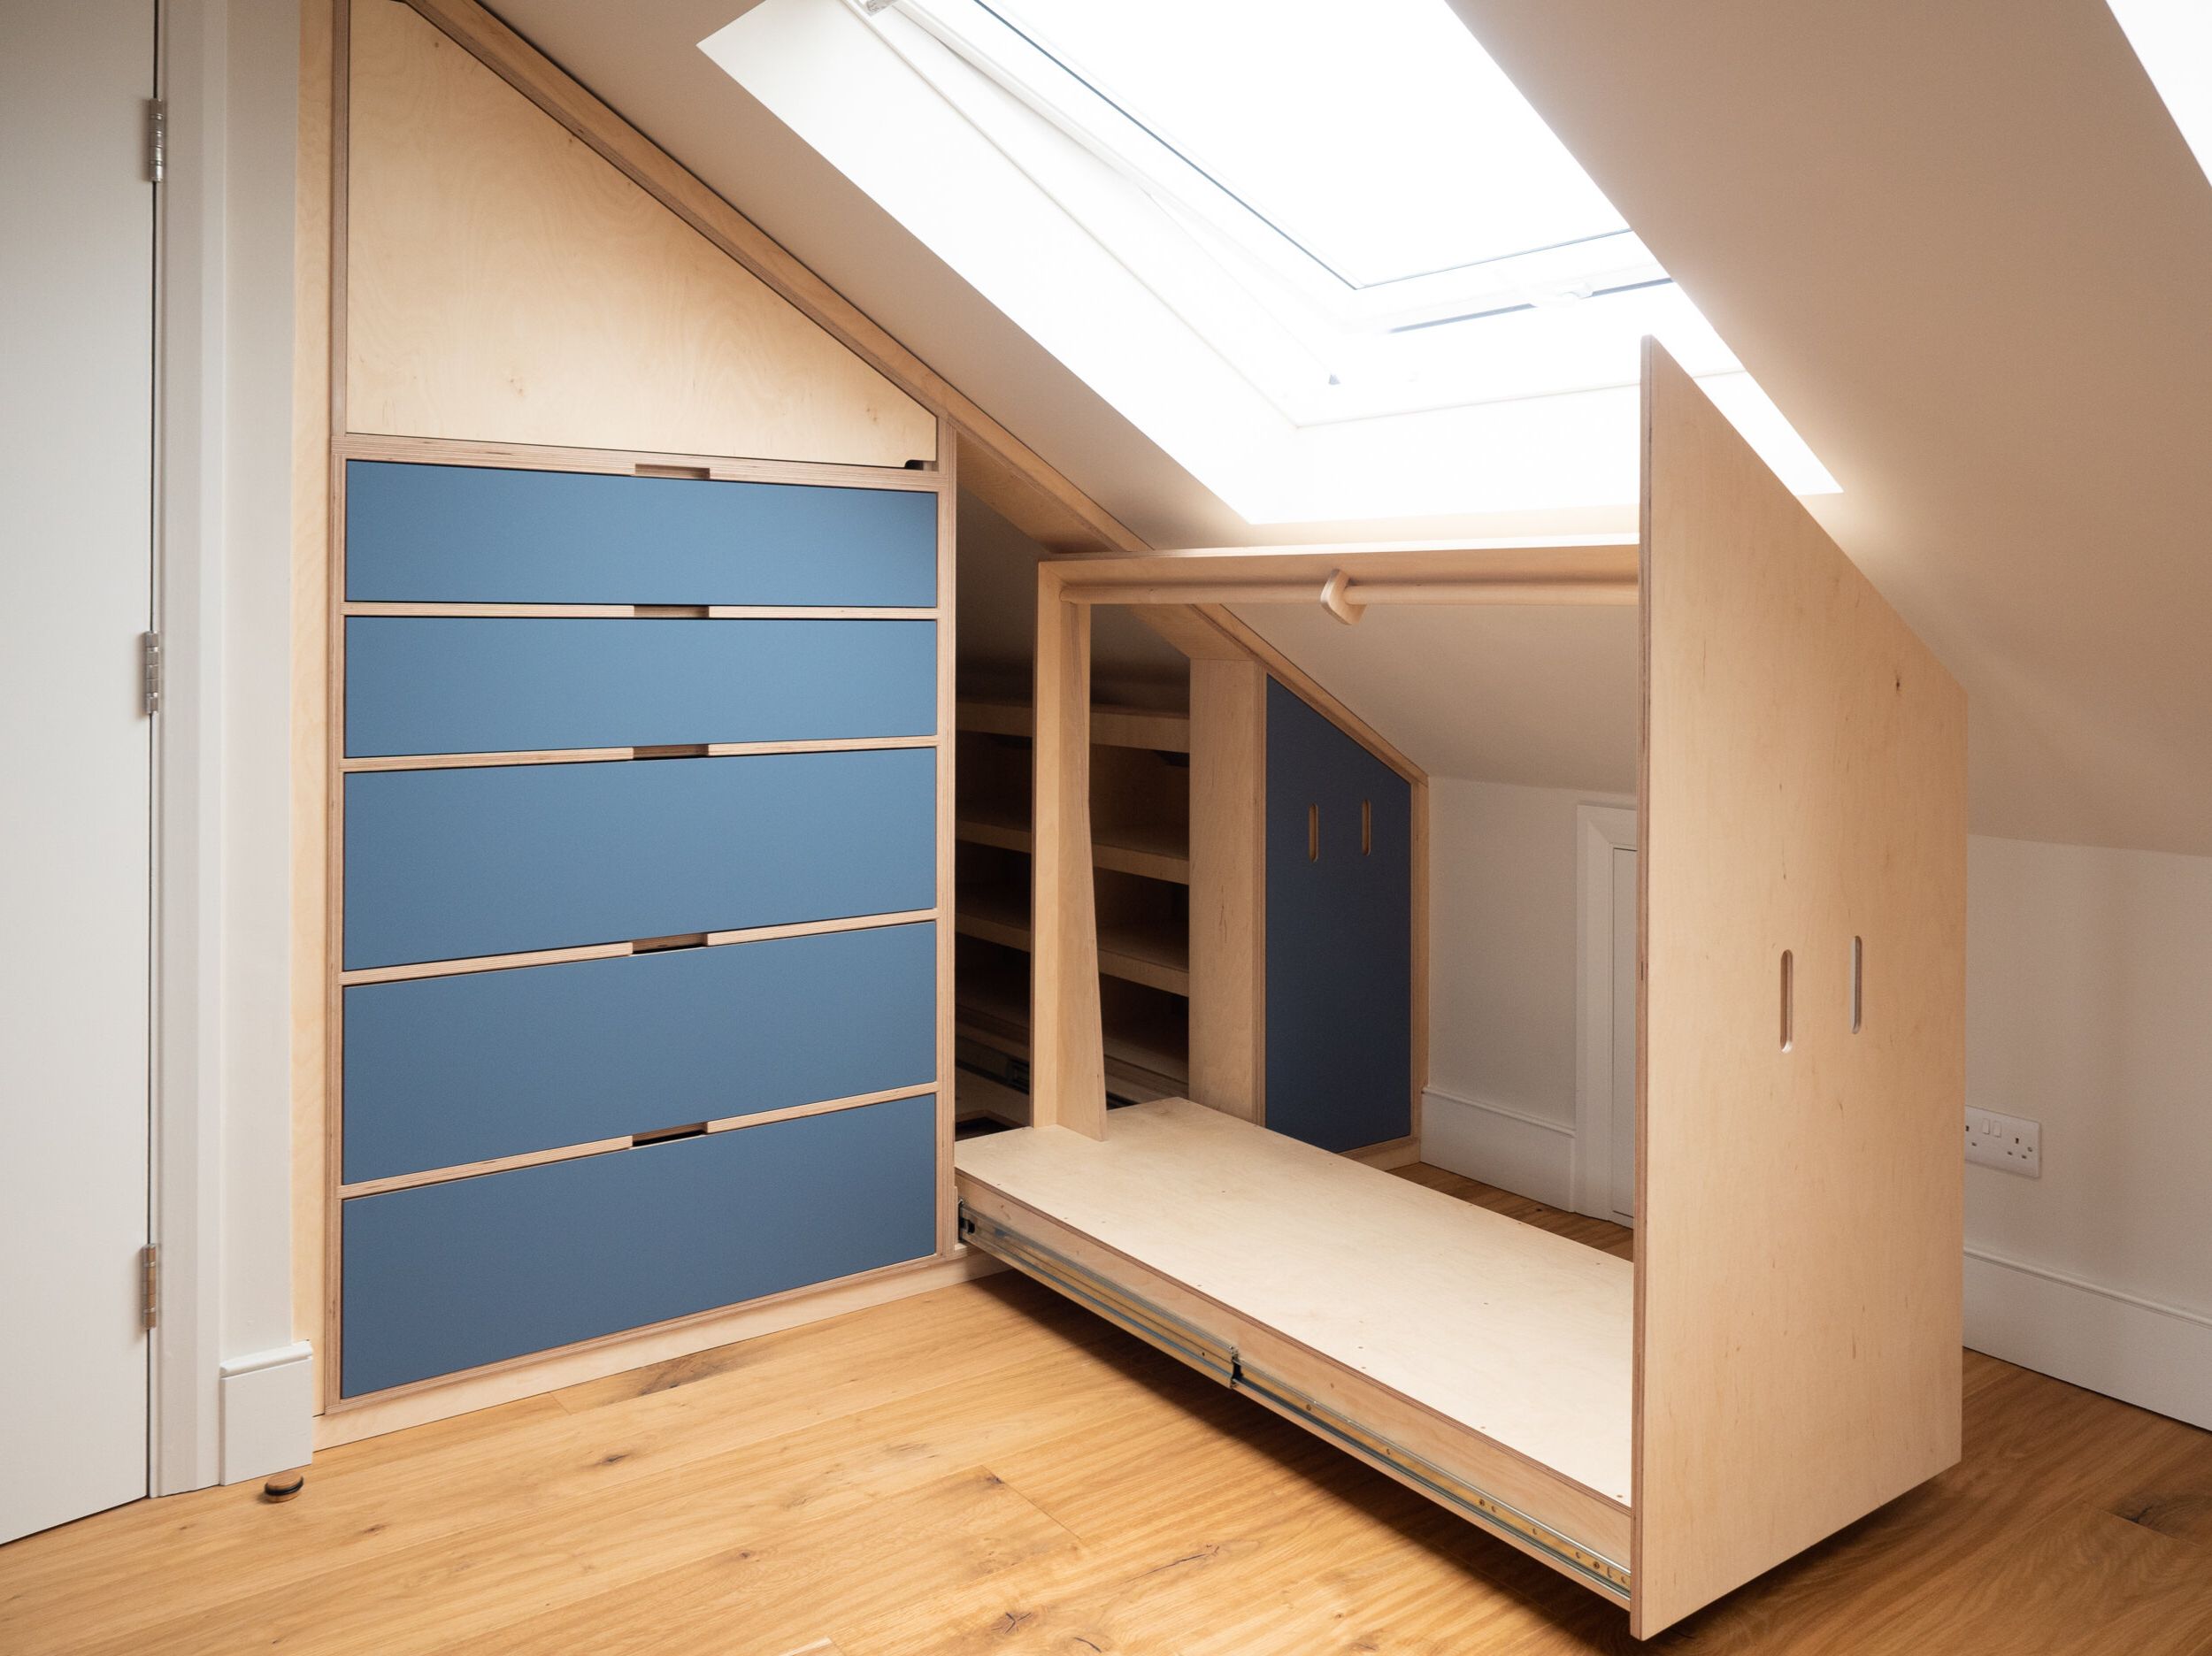 Plywood Eaves Wardrobe (with The Giant Drawers Of Dreams And Fenix Laminate  Fronts) — The Modern Carpenter Inside Heavy Duty Wardrobes (View 12 of 20)